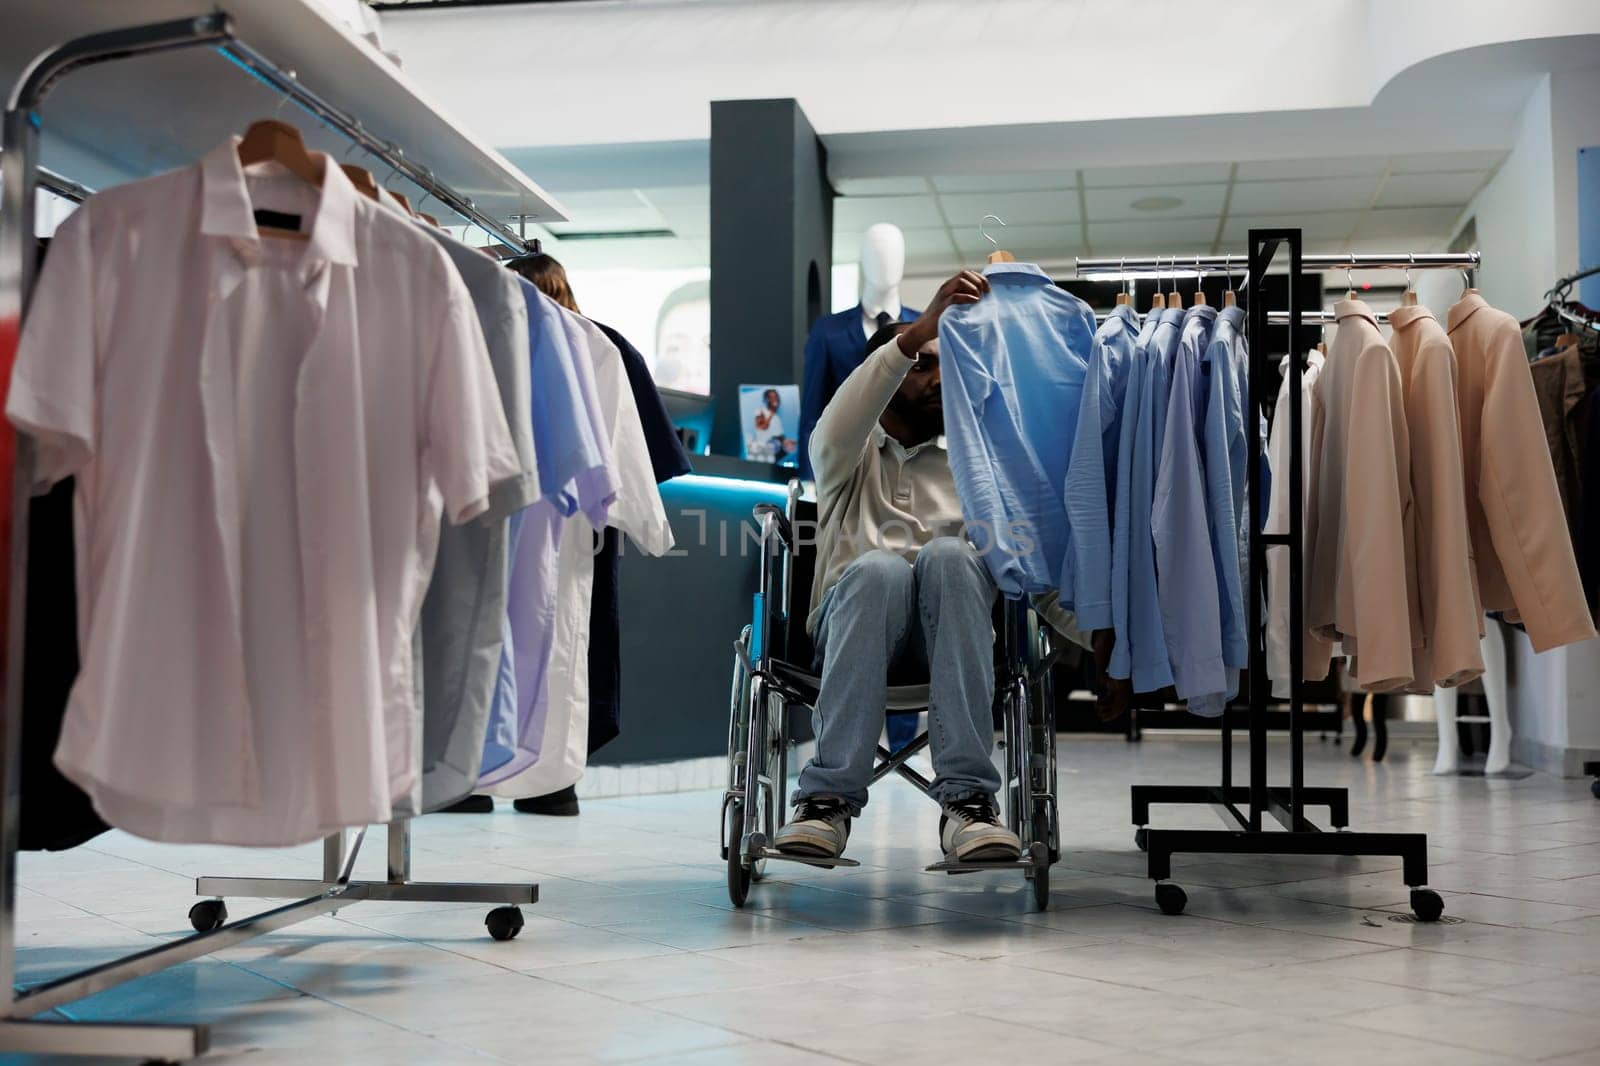 African american man in wheelchair browsing through rack and choosing casual shirt in clothing shop. Shopping center boutique customer with physical disability examining apparel